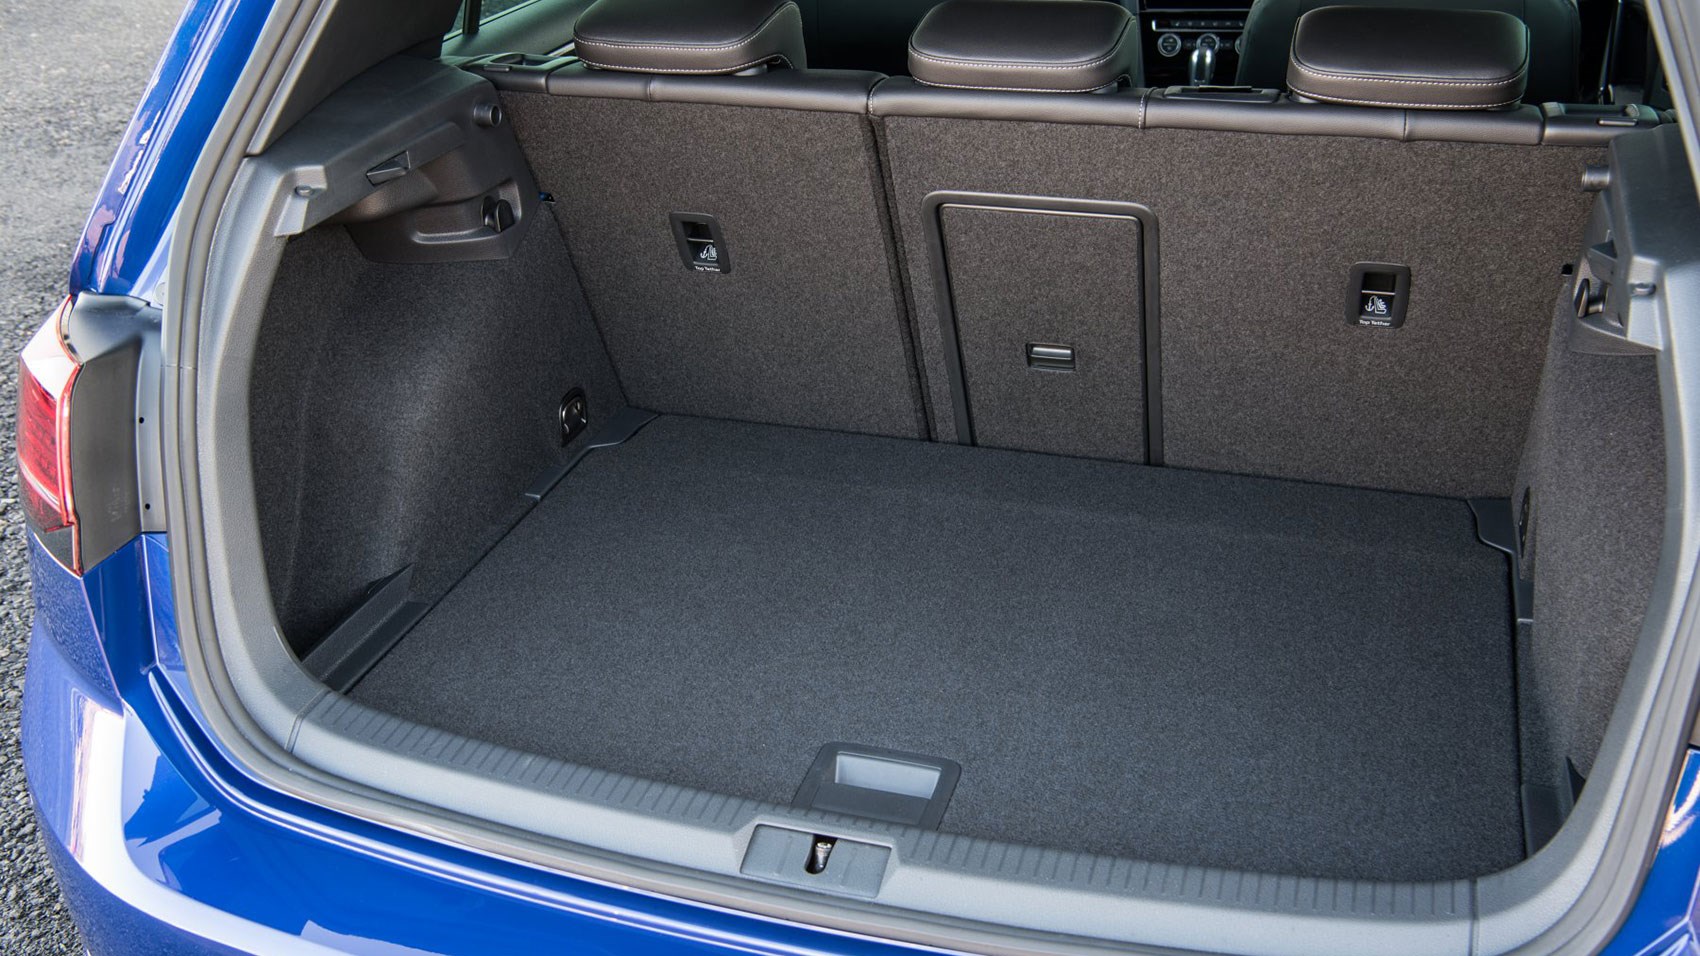 VW Golf R boot space and practicality